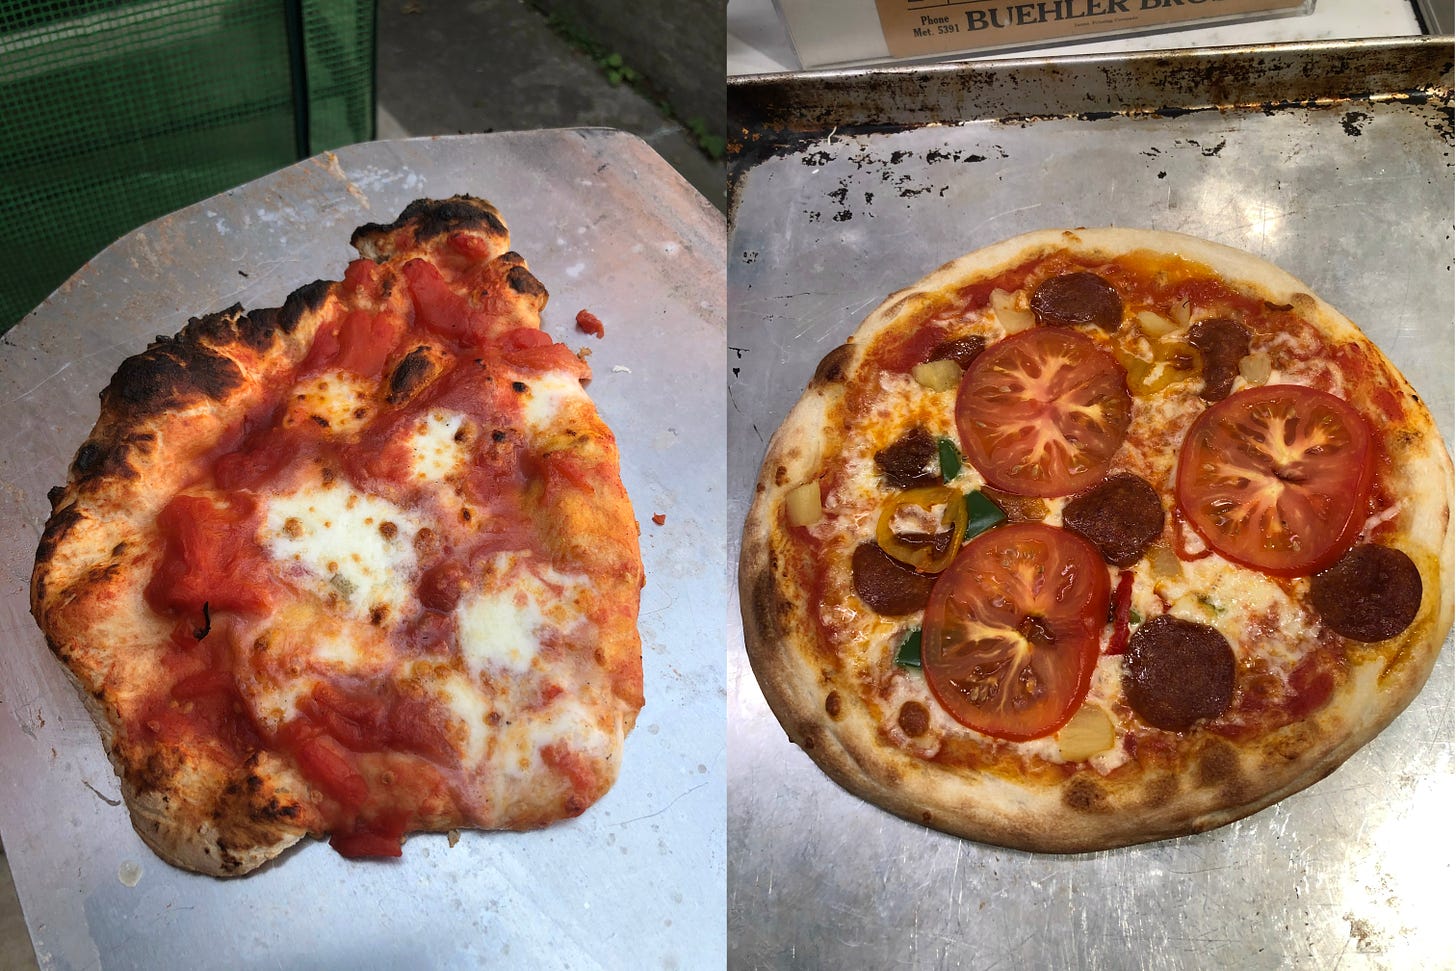 Badly misshapen pizza on left, proper pizza on right.